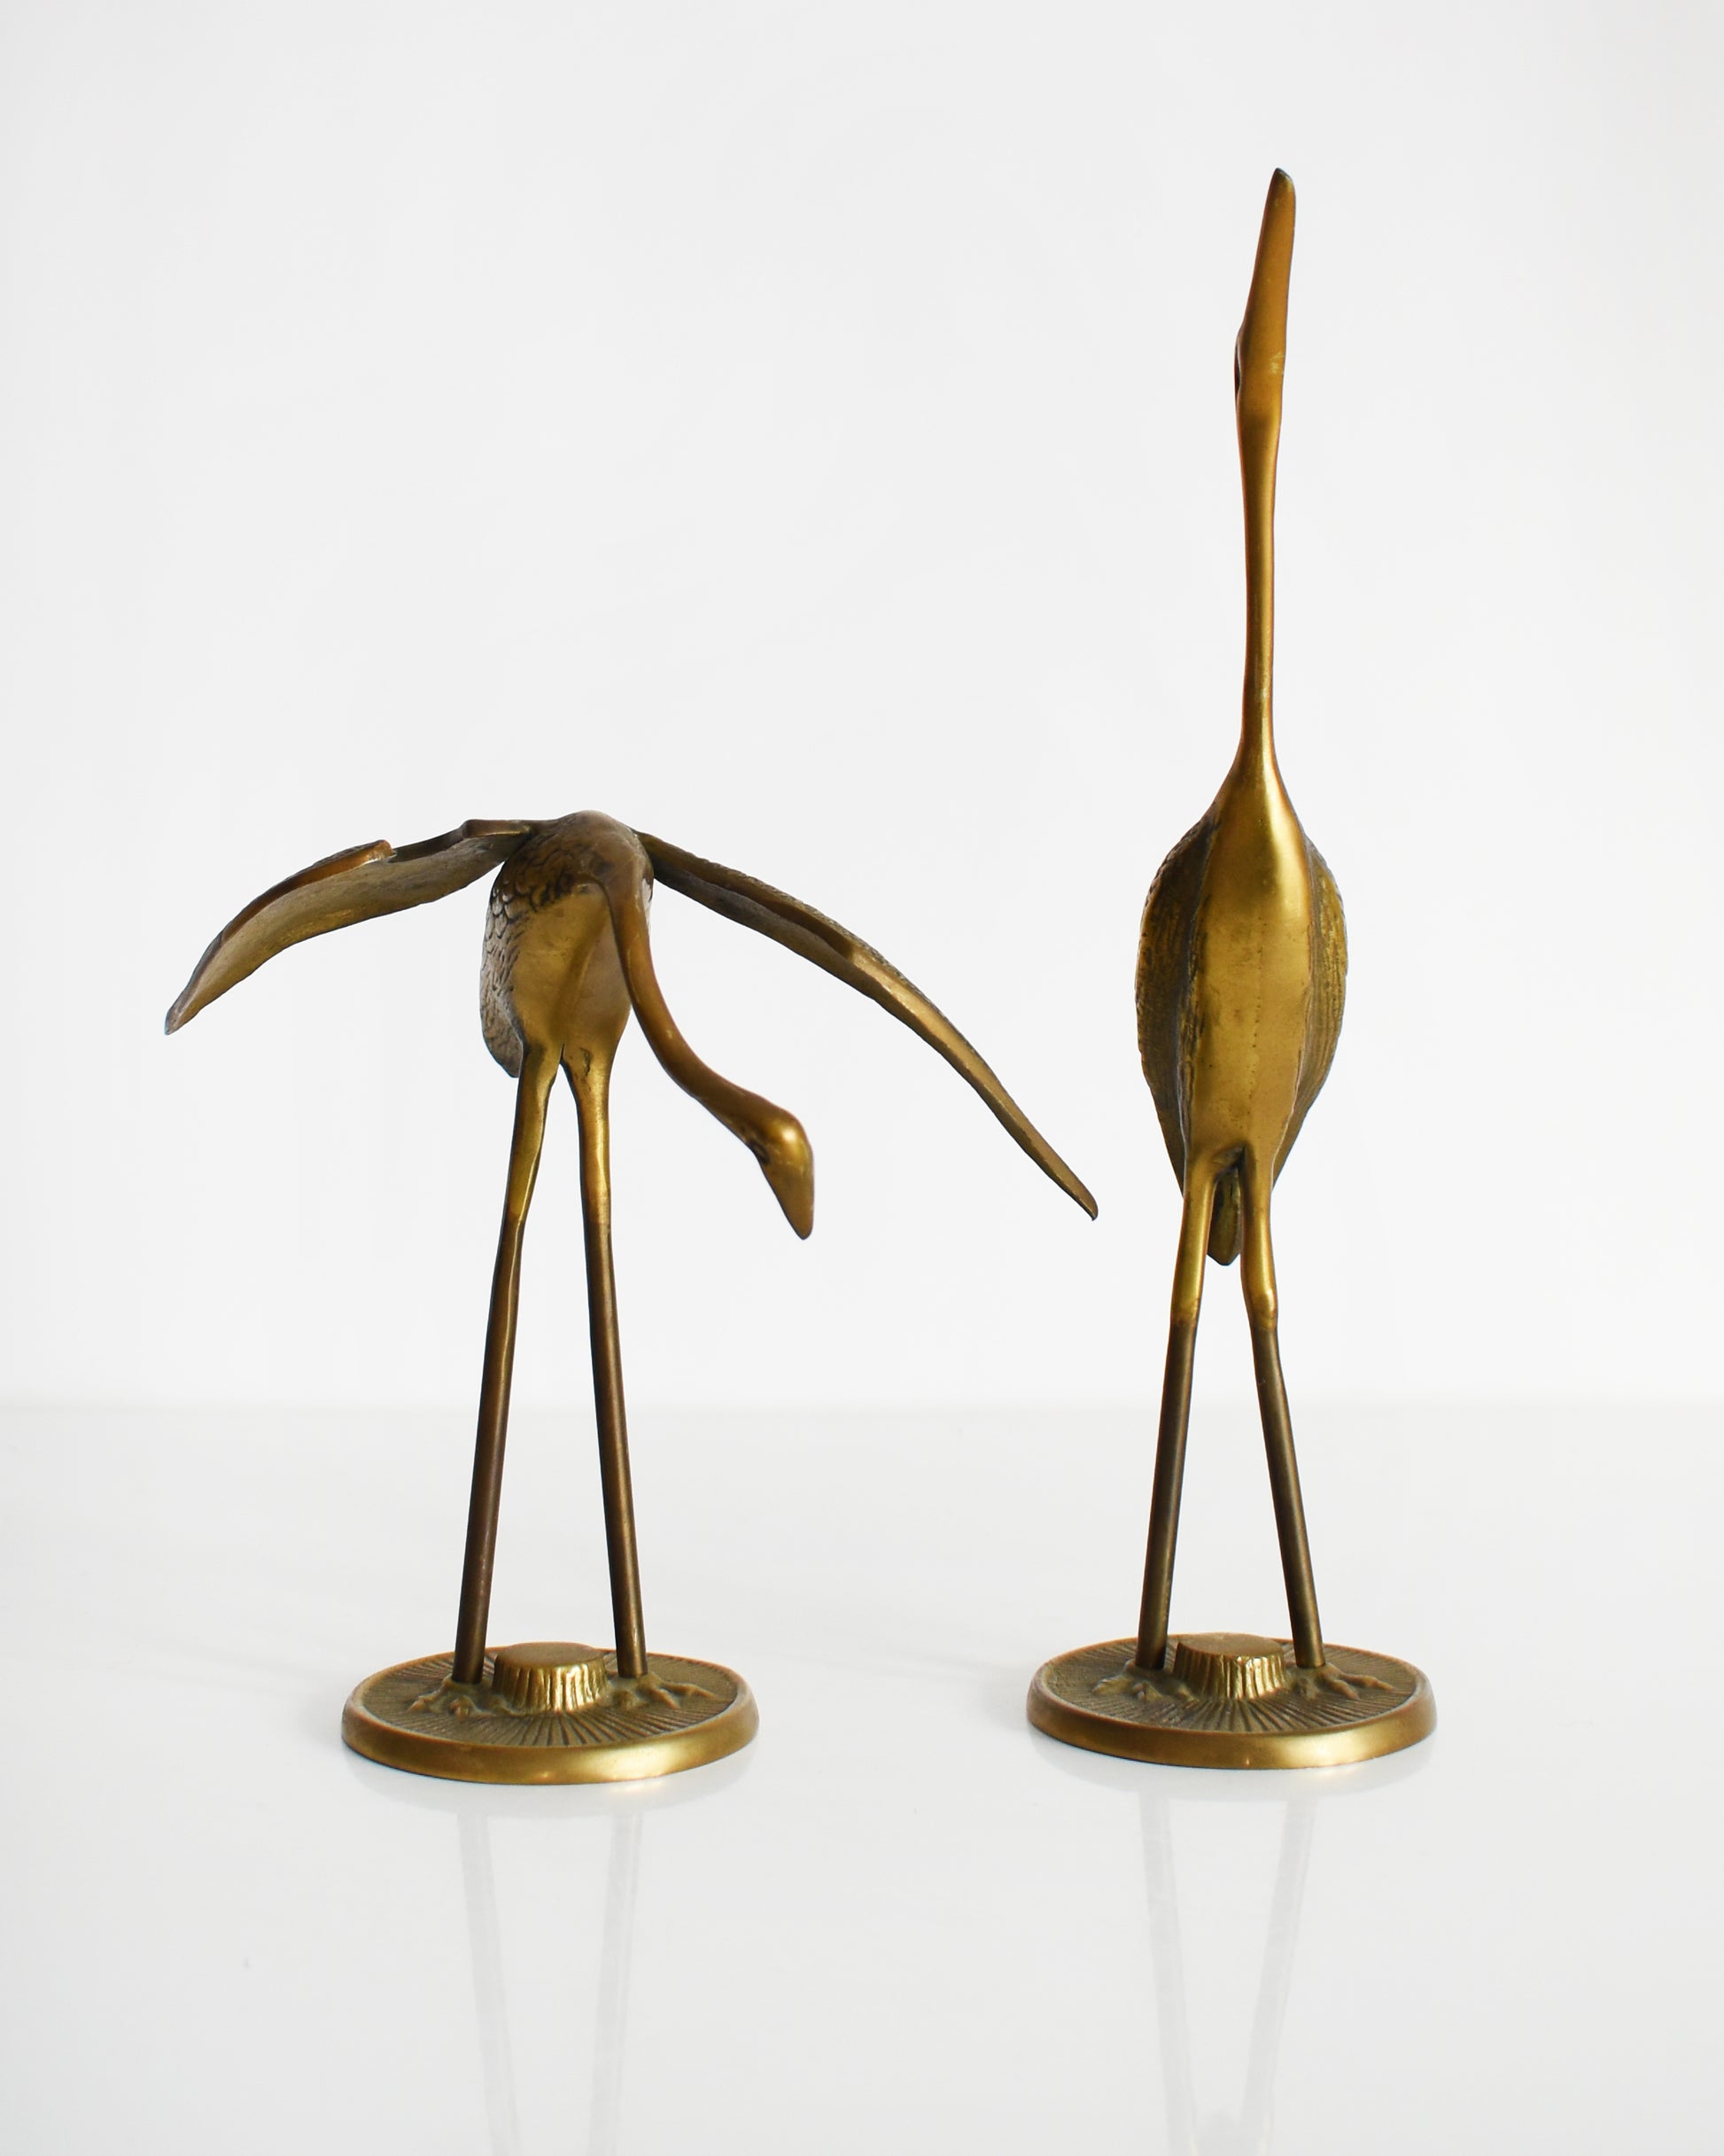 Front view of a pair of vintage brass cranes that have ornate carved detail on their wings and body.